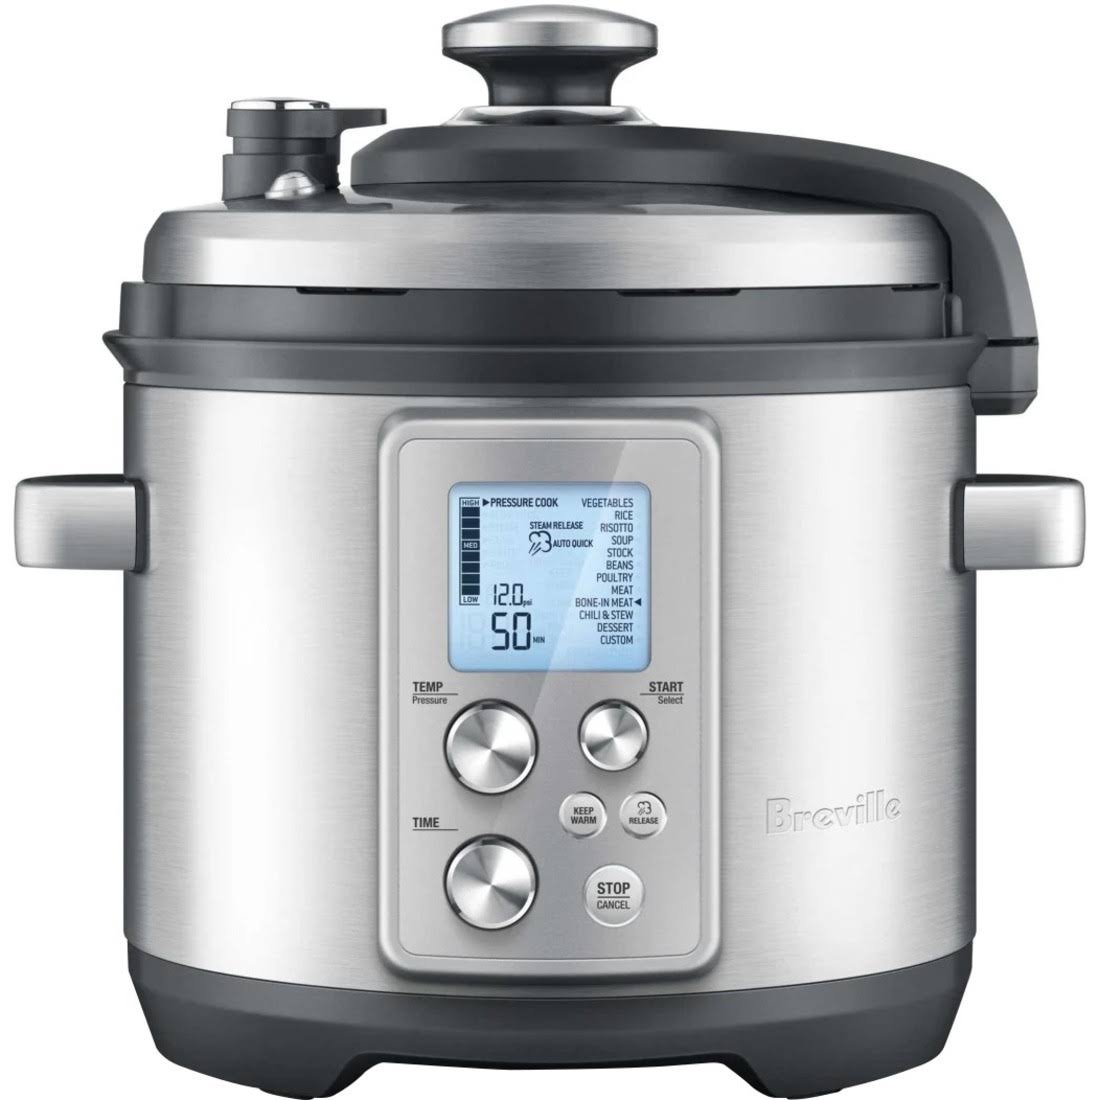 Breville The Fast Slow Pro Multi Cooker - Silver